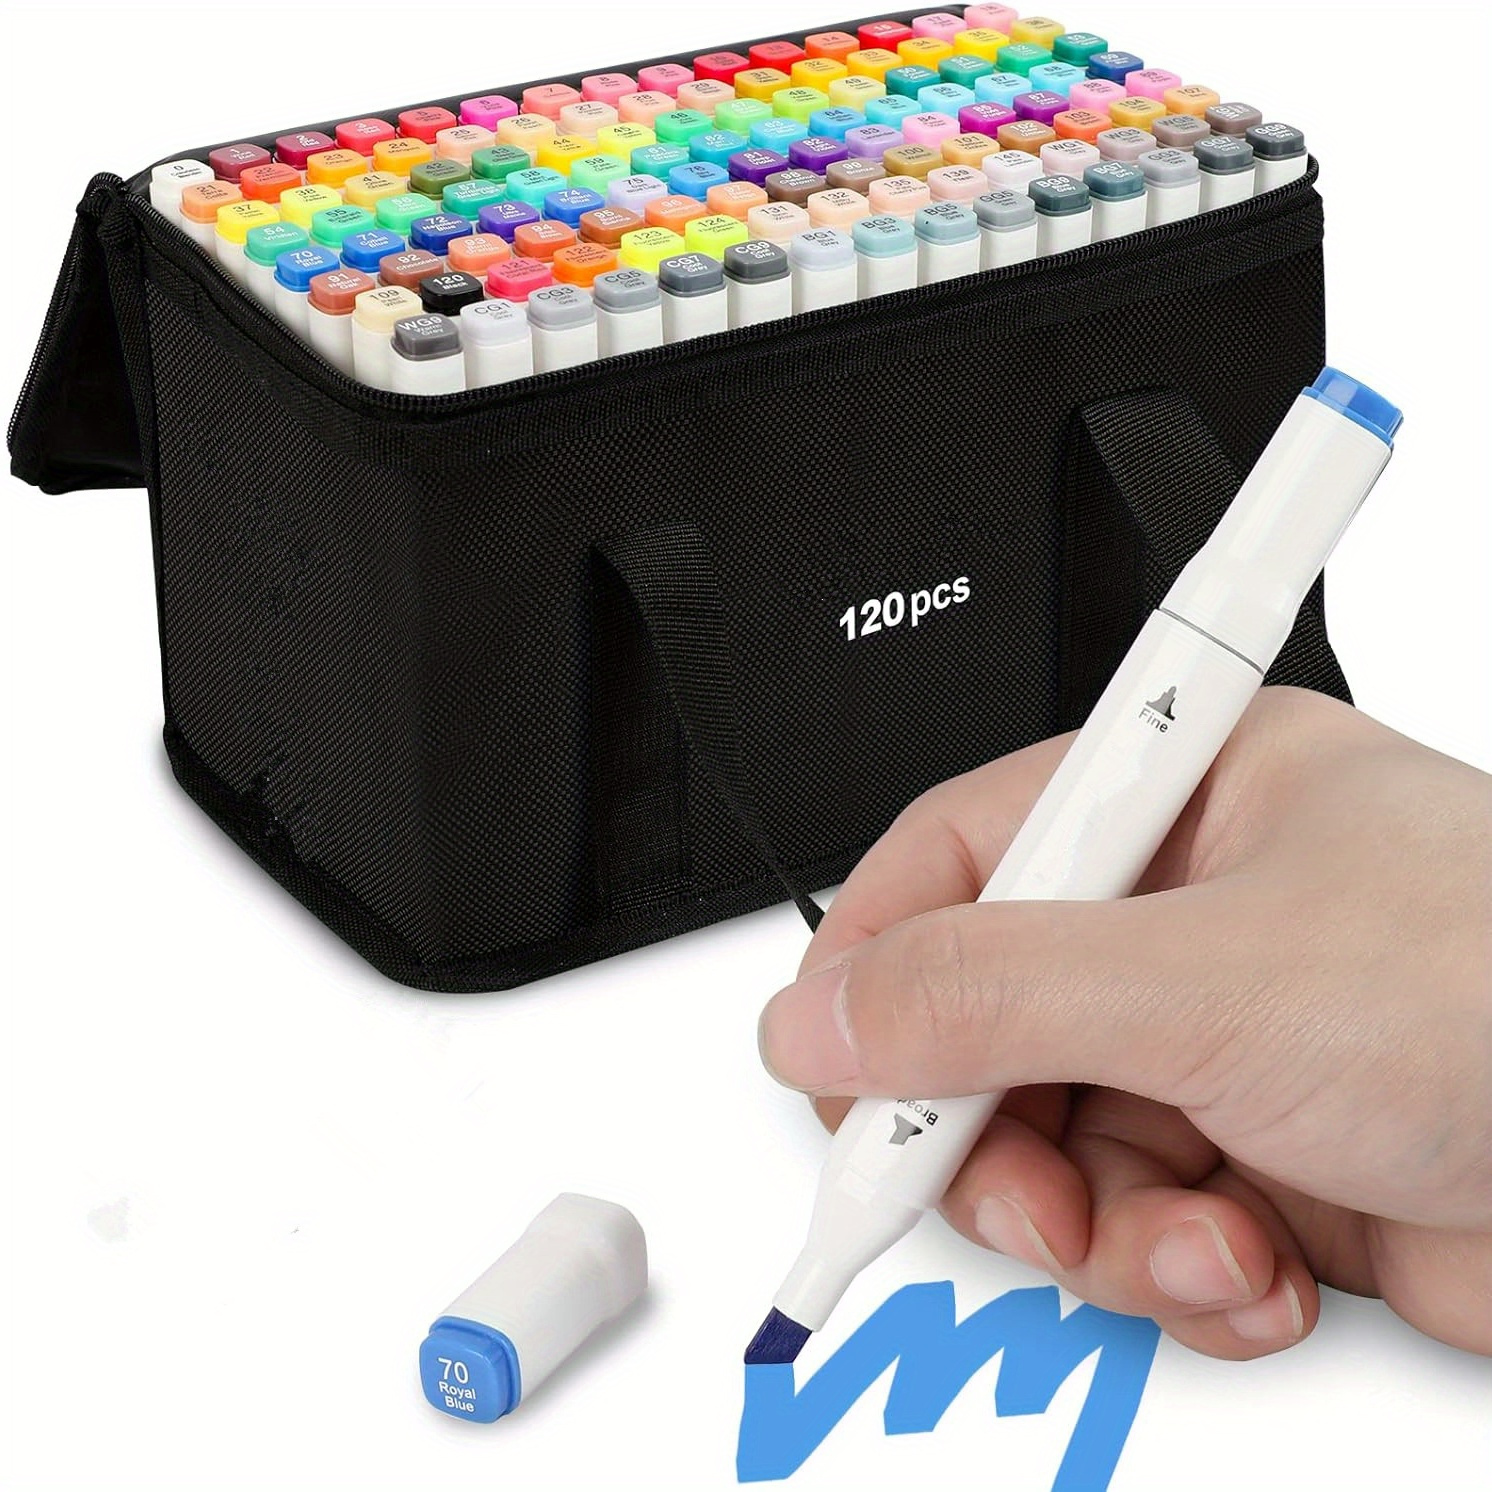 Ohuhu Alcohol Markers Brush Tip- 104-color Double Greece